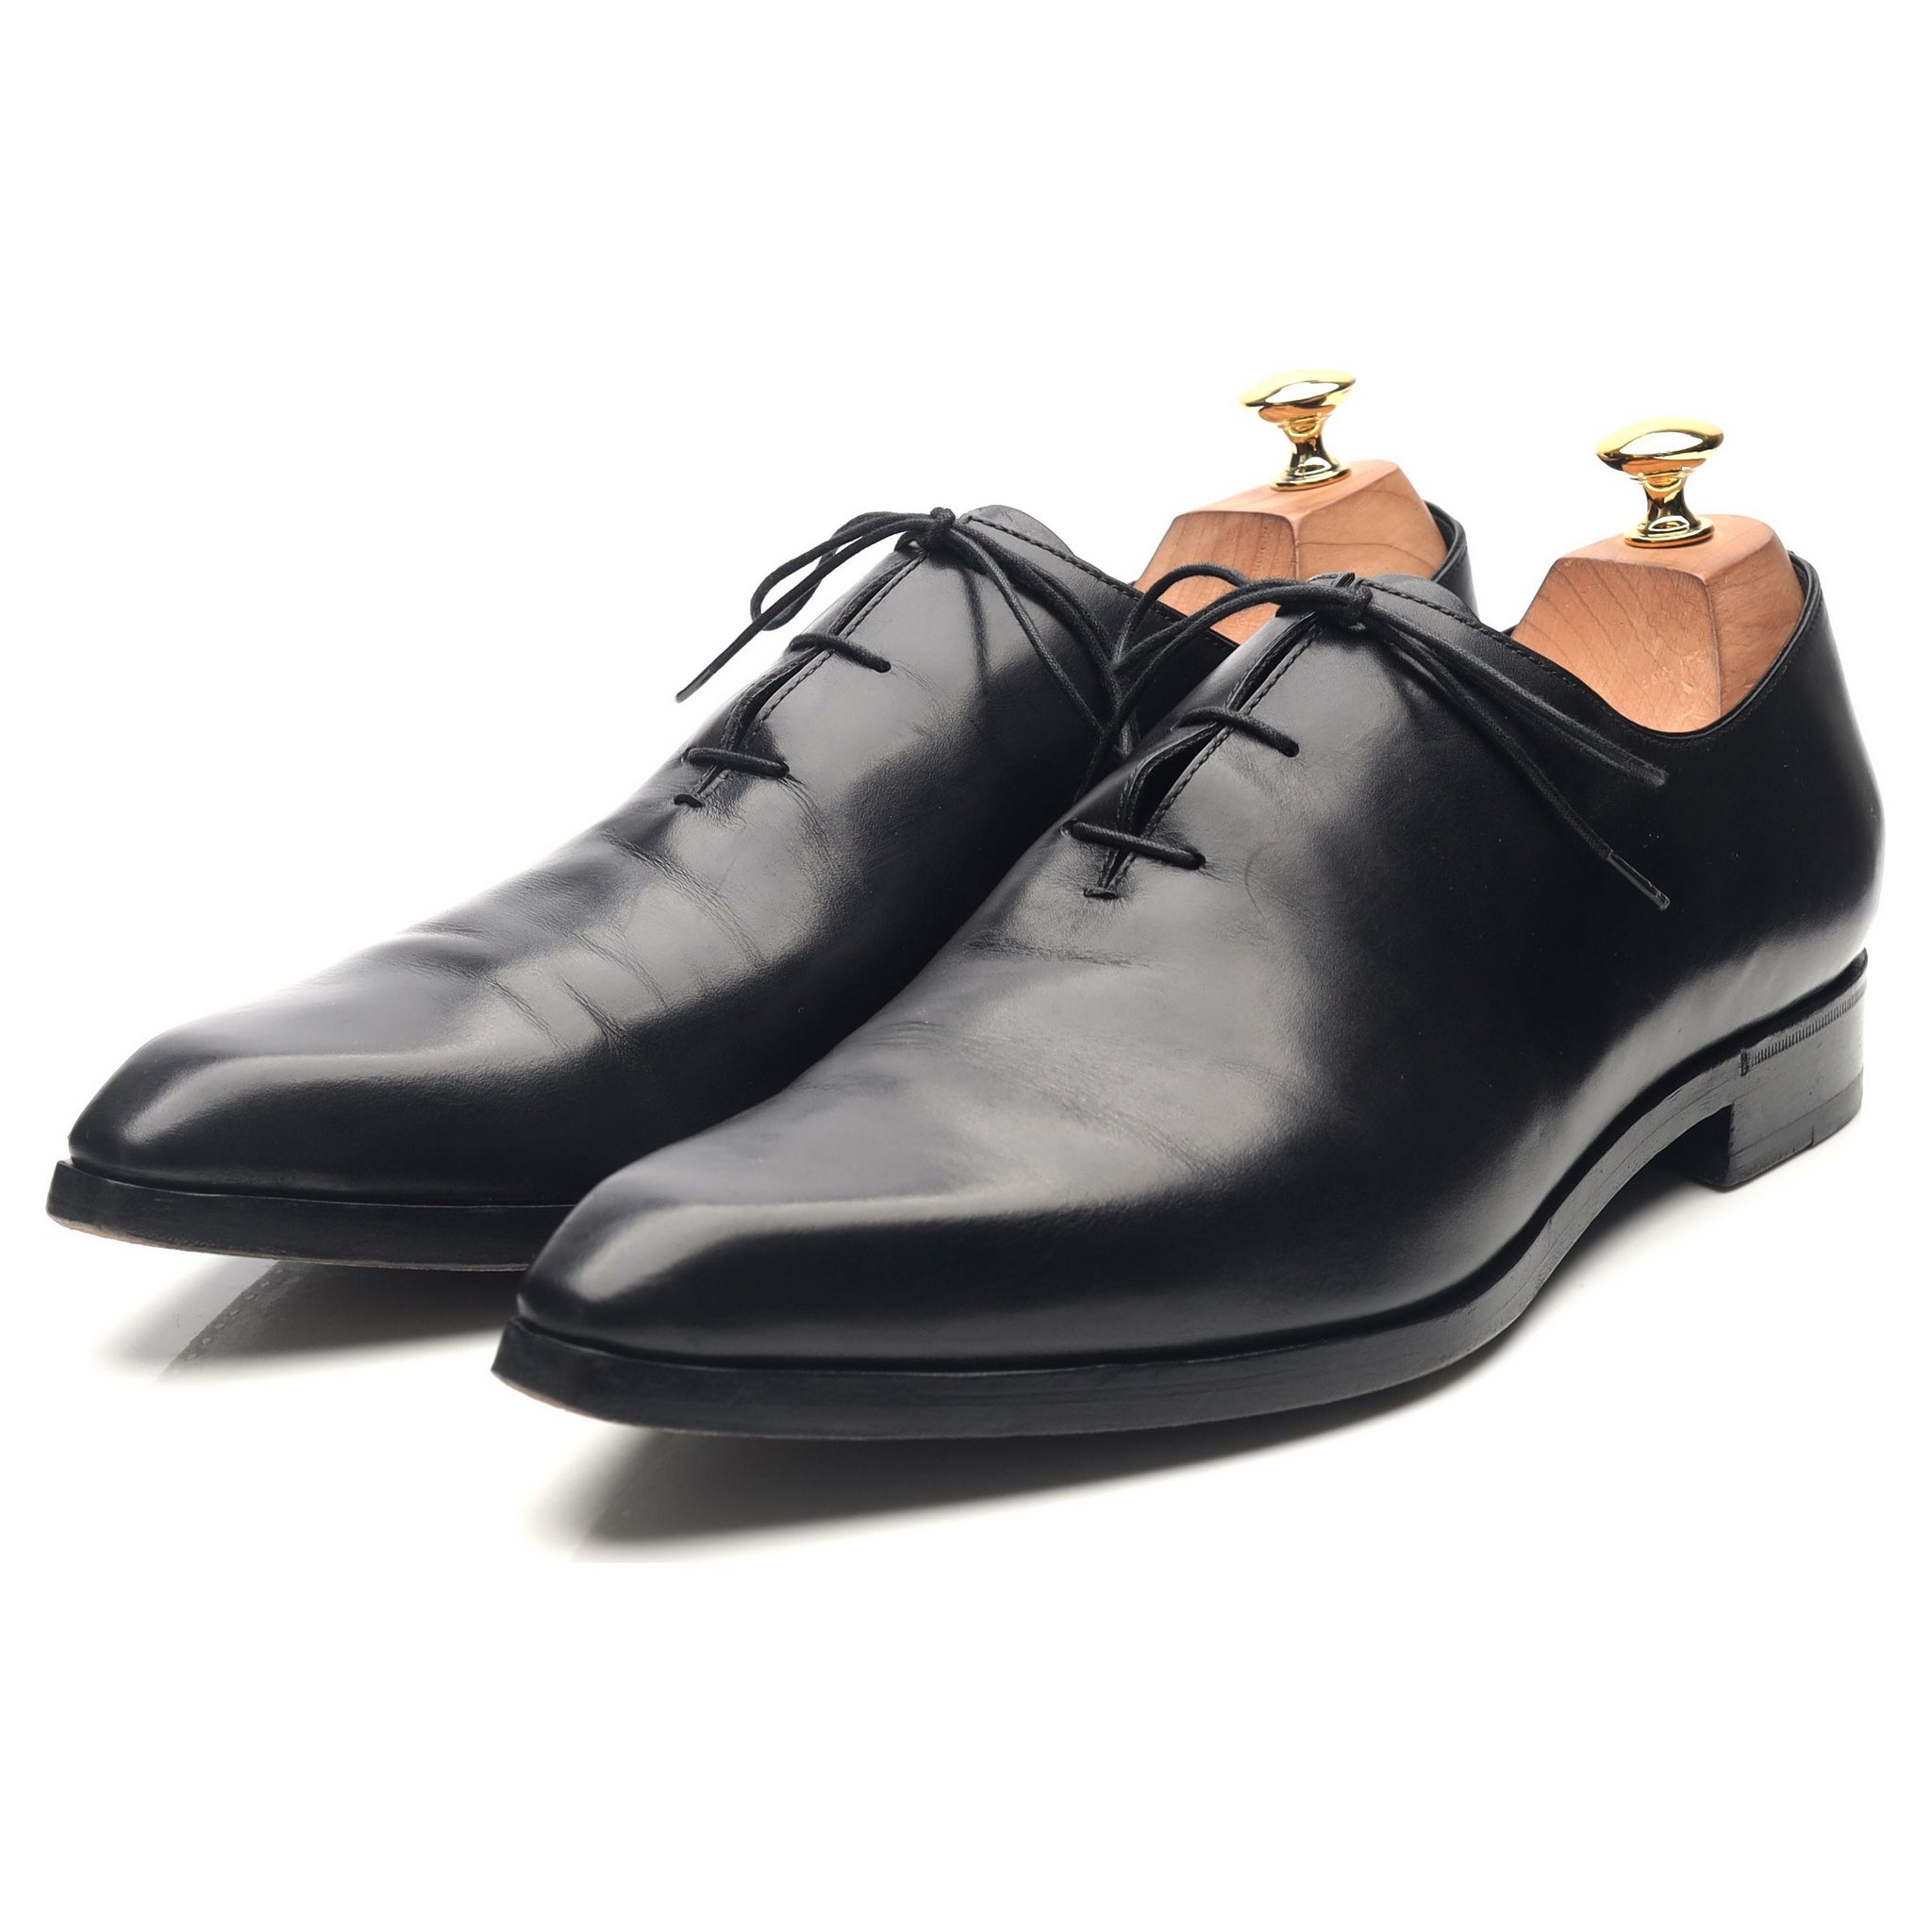 Black Leather Wholecut Oxford UK 10.5 - Abbot's Shoes